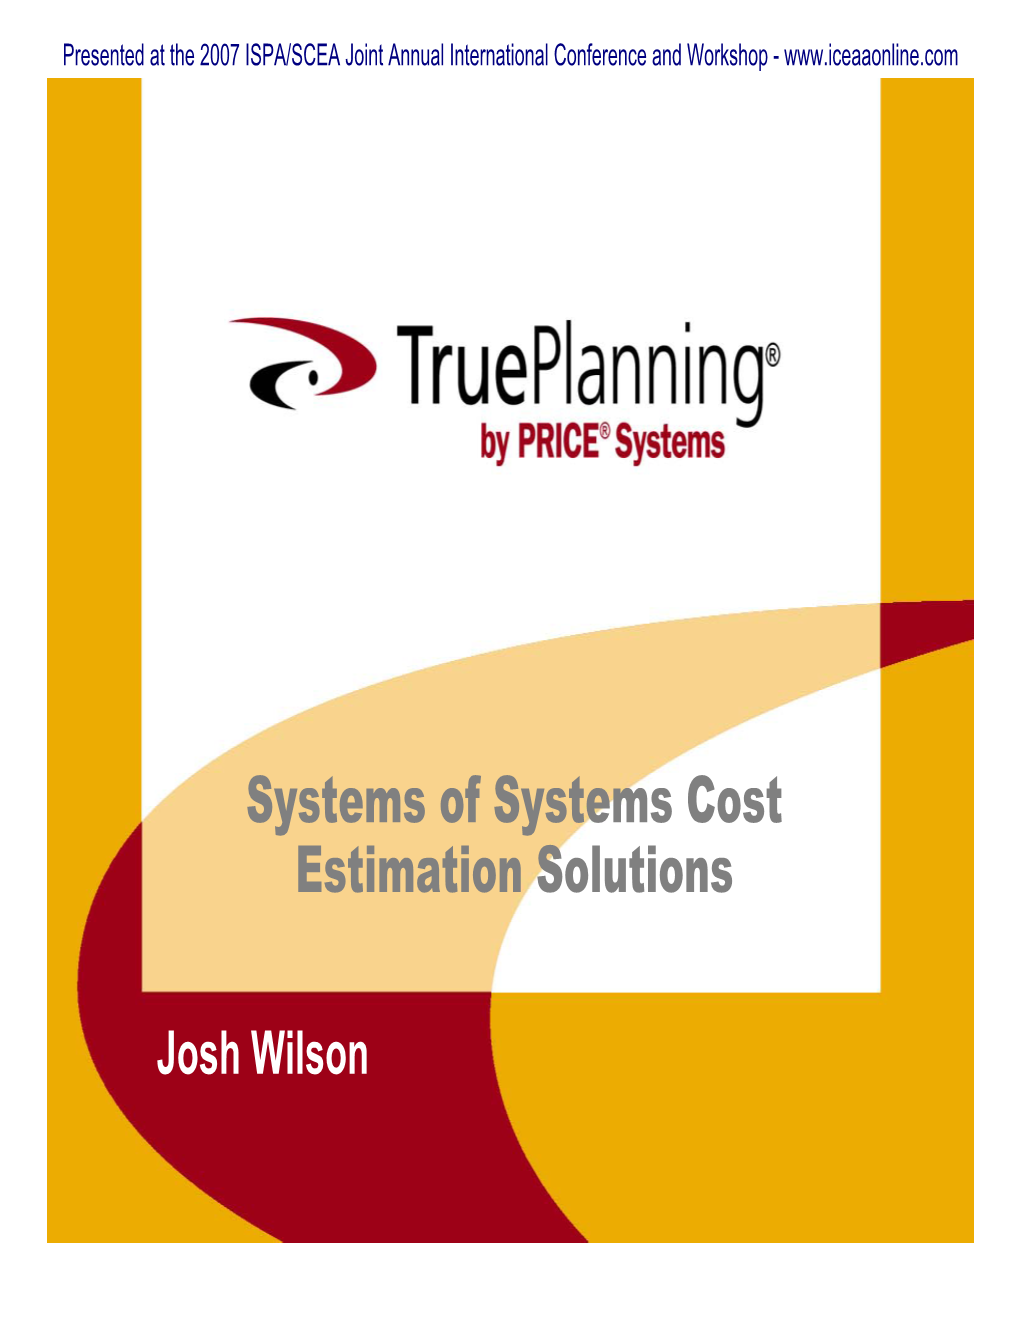 Systems of Systems Cost Estimation Solutions